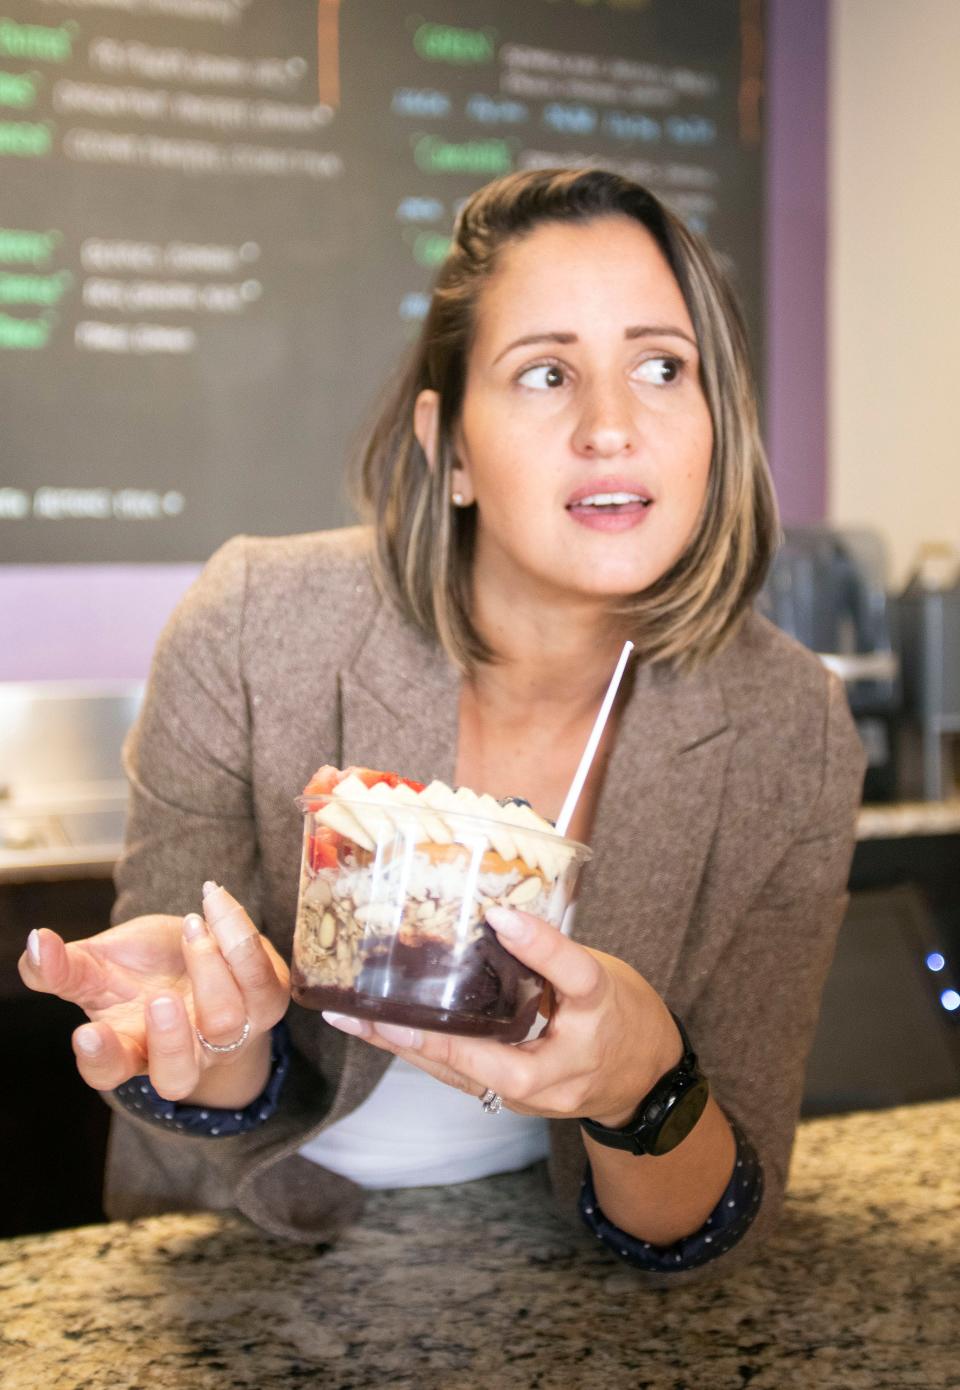 Acai Bowls Tropical Fusion owner Wilmary Amaya describes the benefits of her Acai bowls while opening her Gulf Breeze store on Wednesday, Jan. 18, 2023. Amaya will open a second location at the Garden in downtown Pensacola within the next few days.